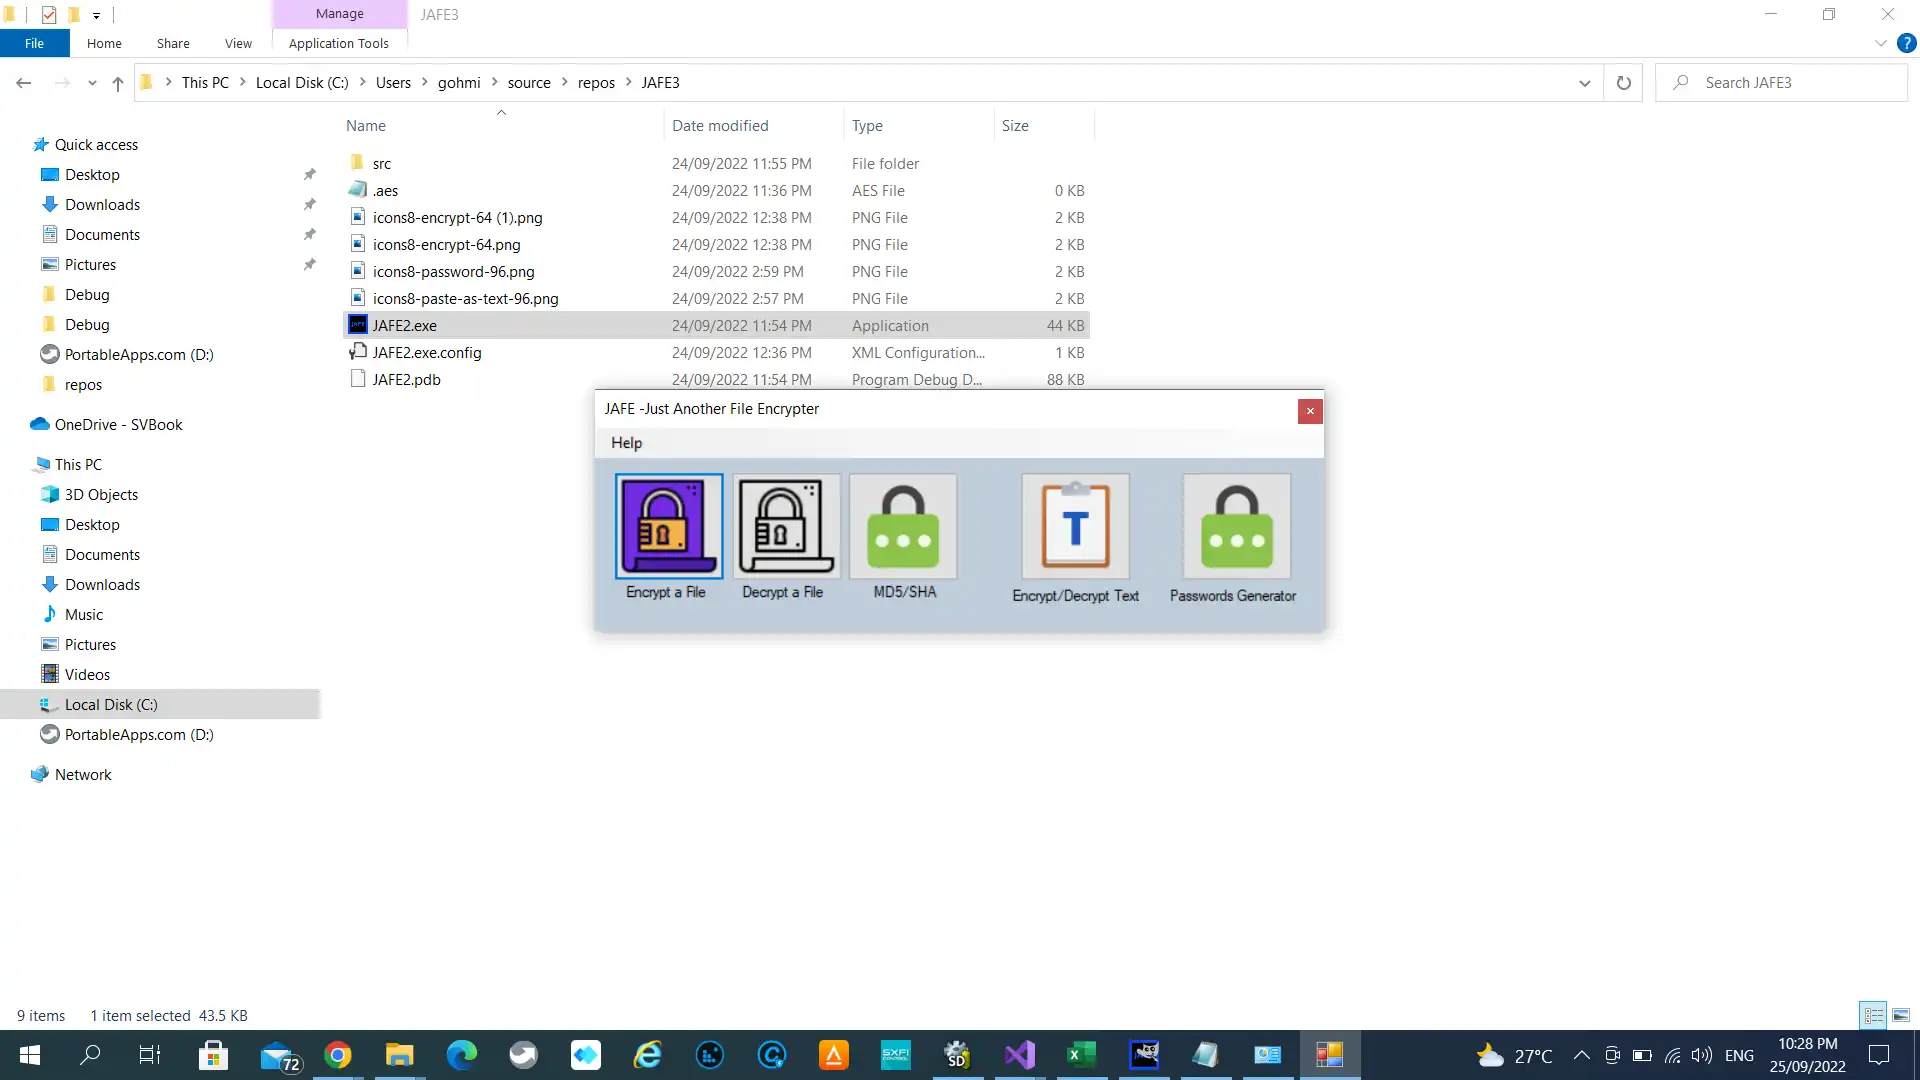 Download web tool or web app JAFE - Just Another File Encrypter